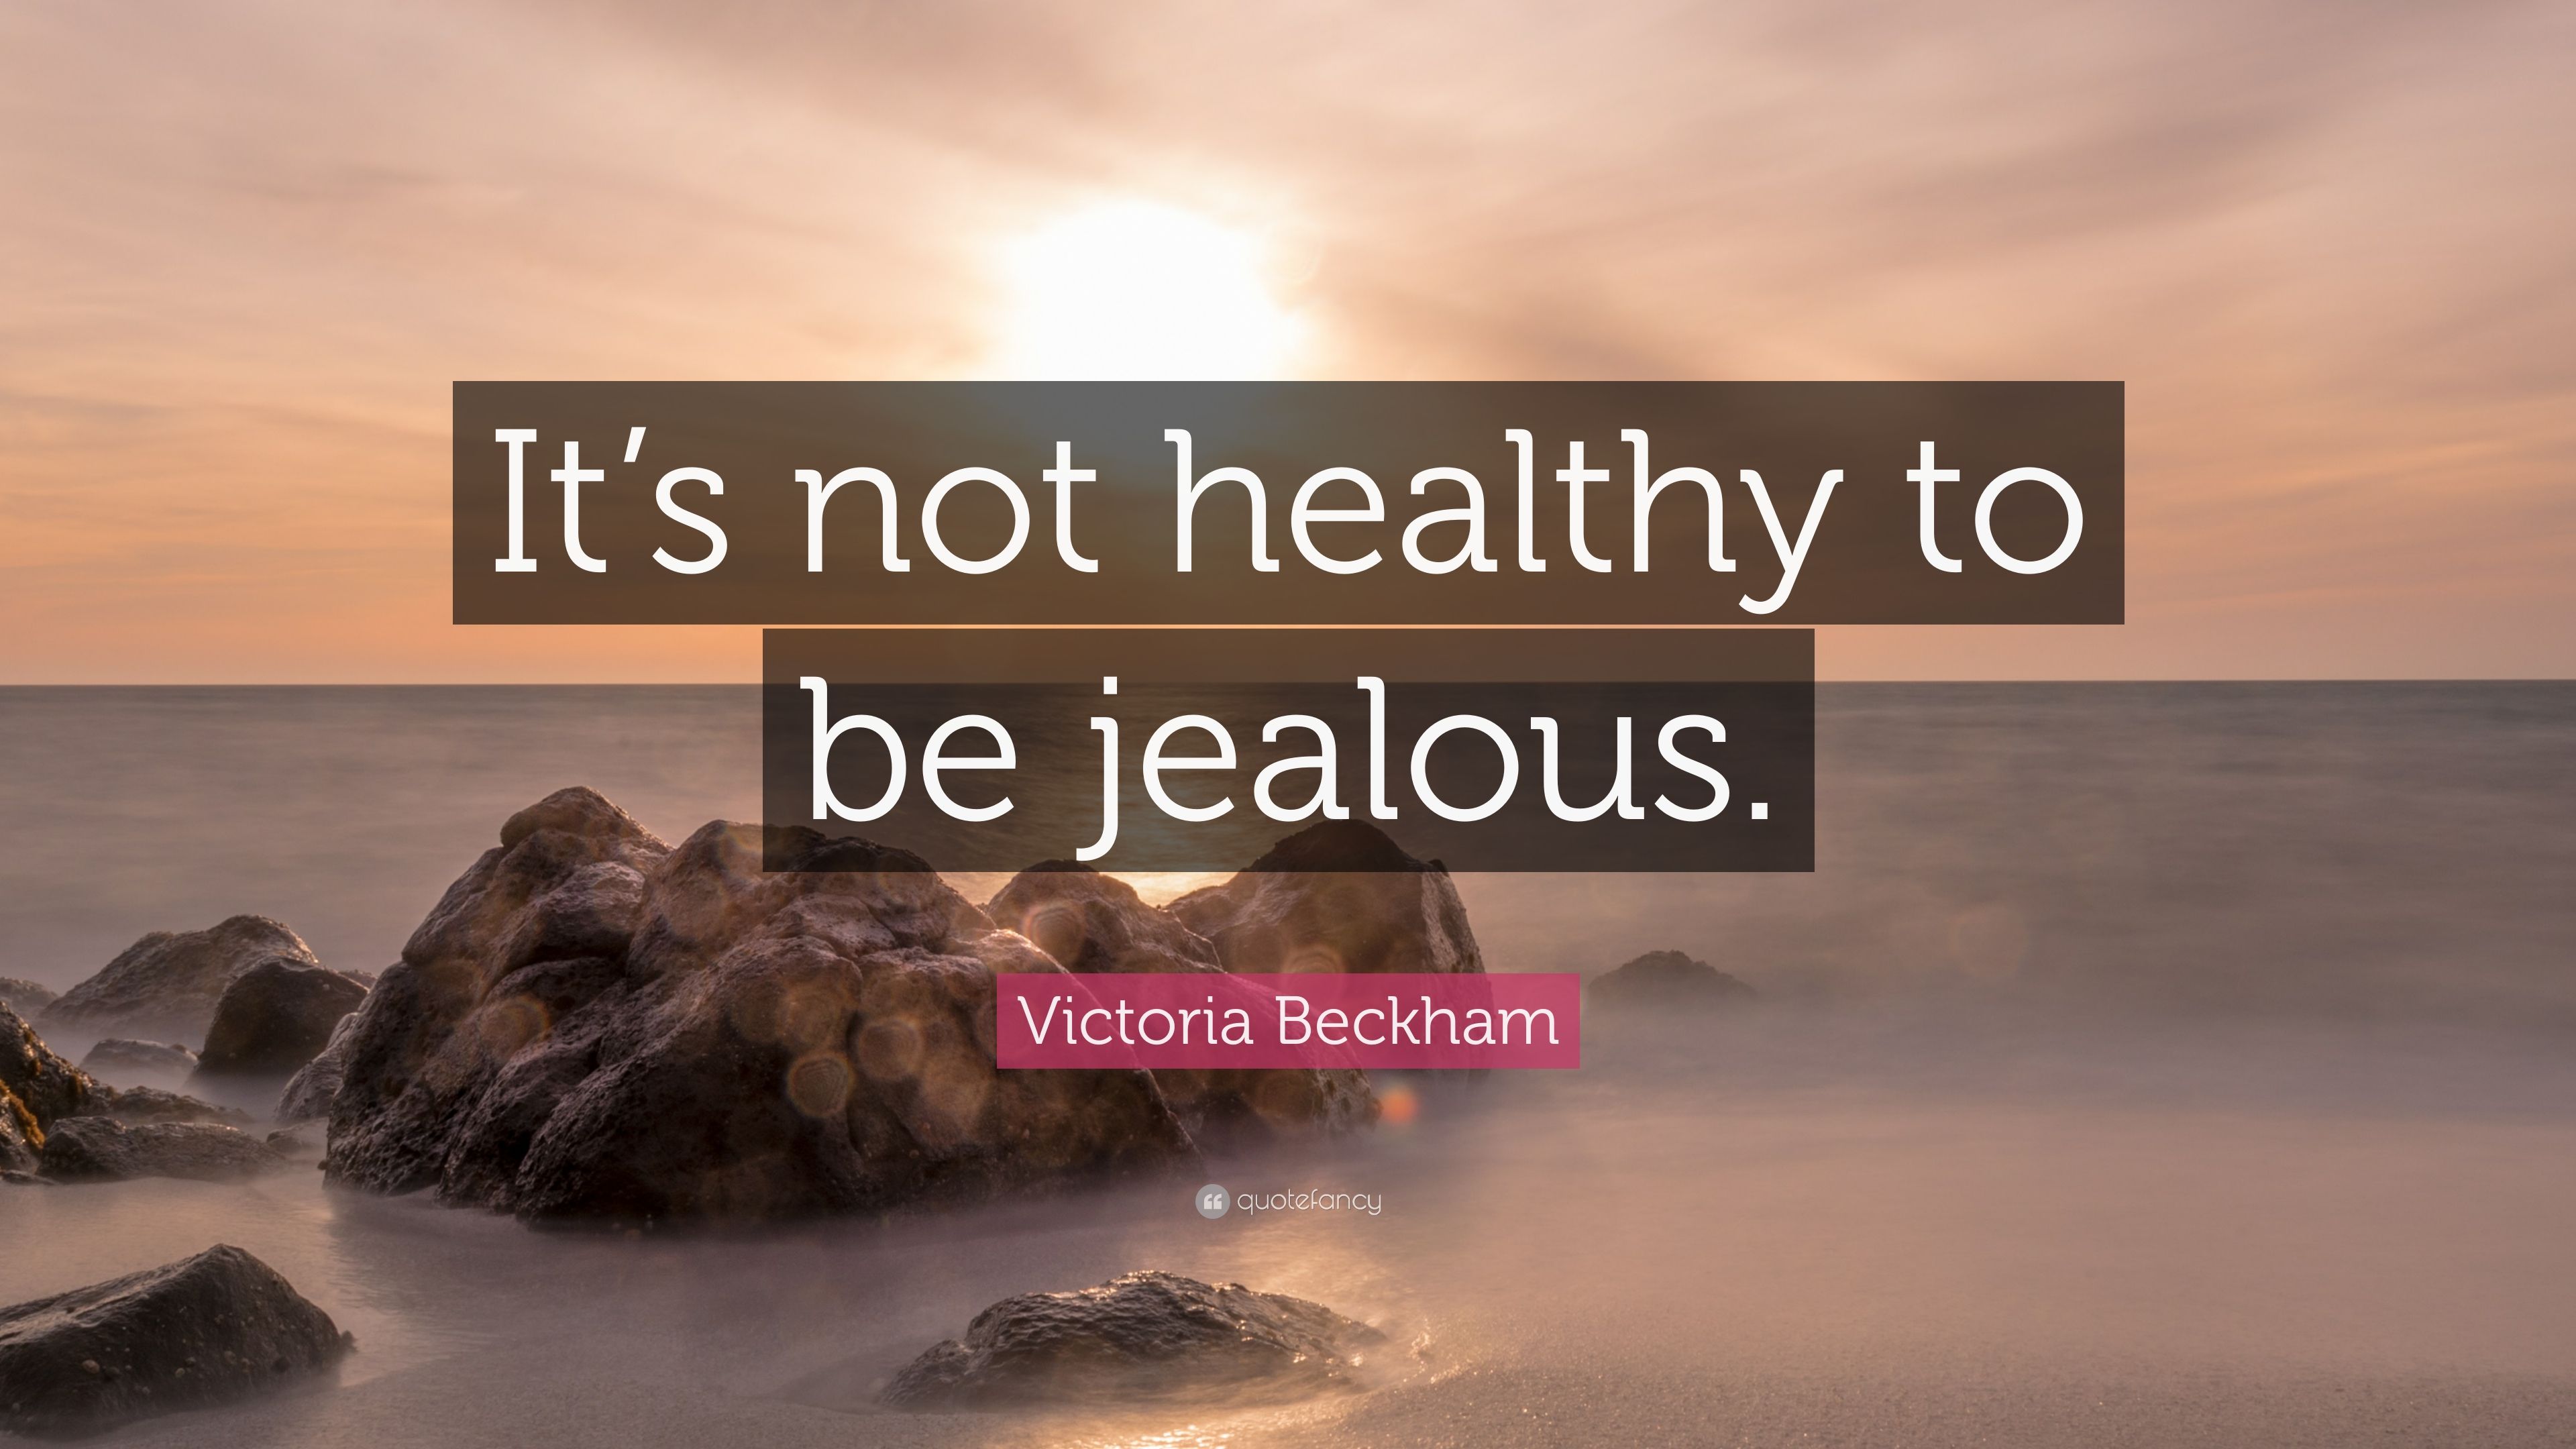 Victoria Beckham Quote: “It's not healthy to be jealous.” 10